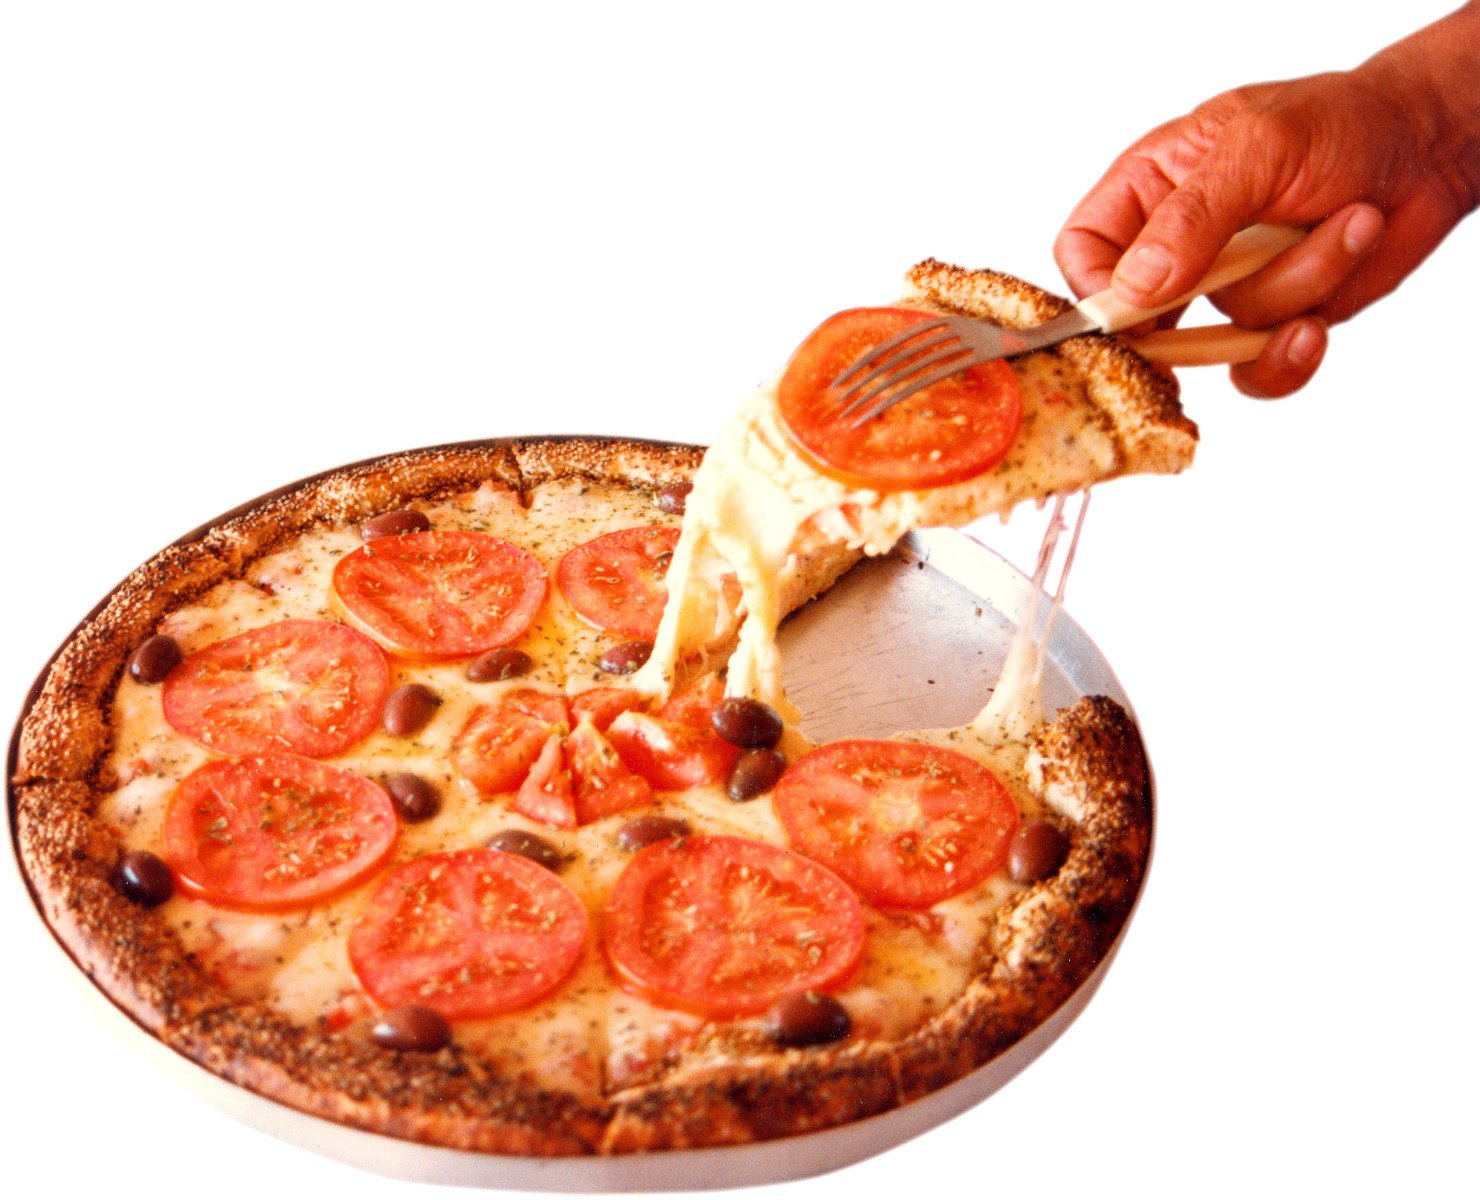 a person holding a pizza with melted cheese on it